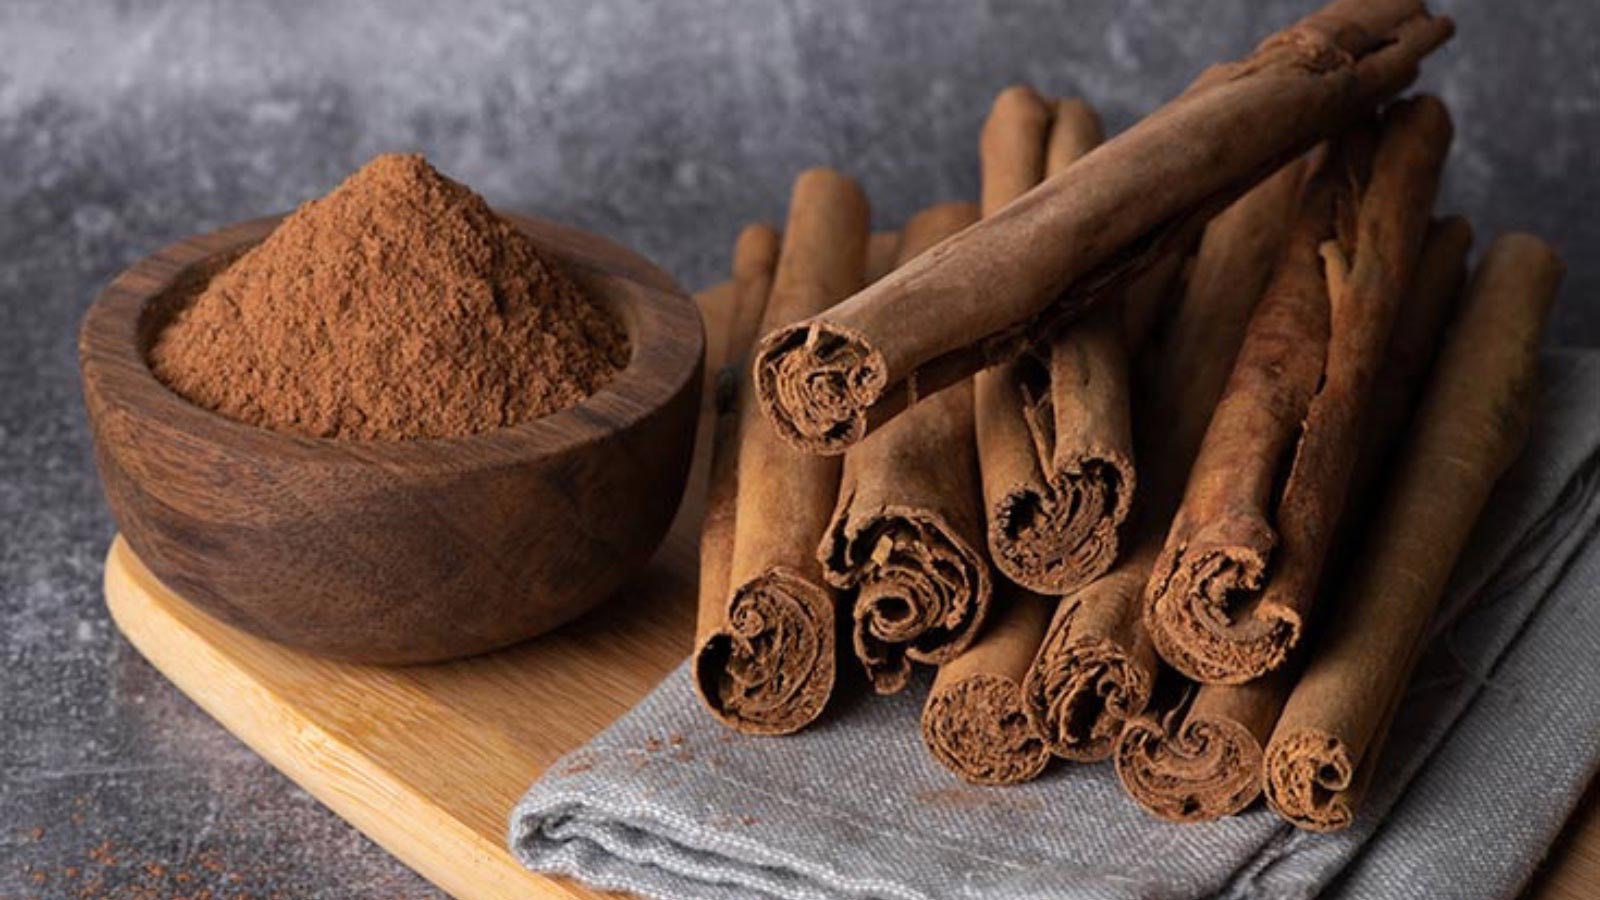 Cinnamon sticks and a small wood bowl of ground cinnamon on a cutting board.